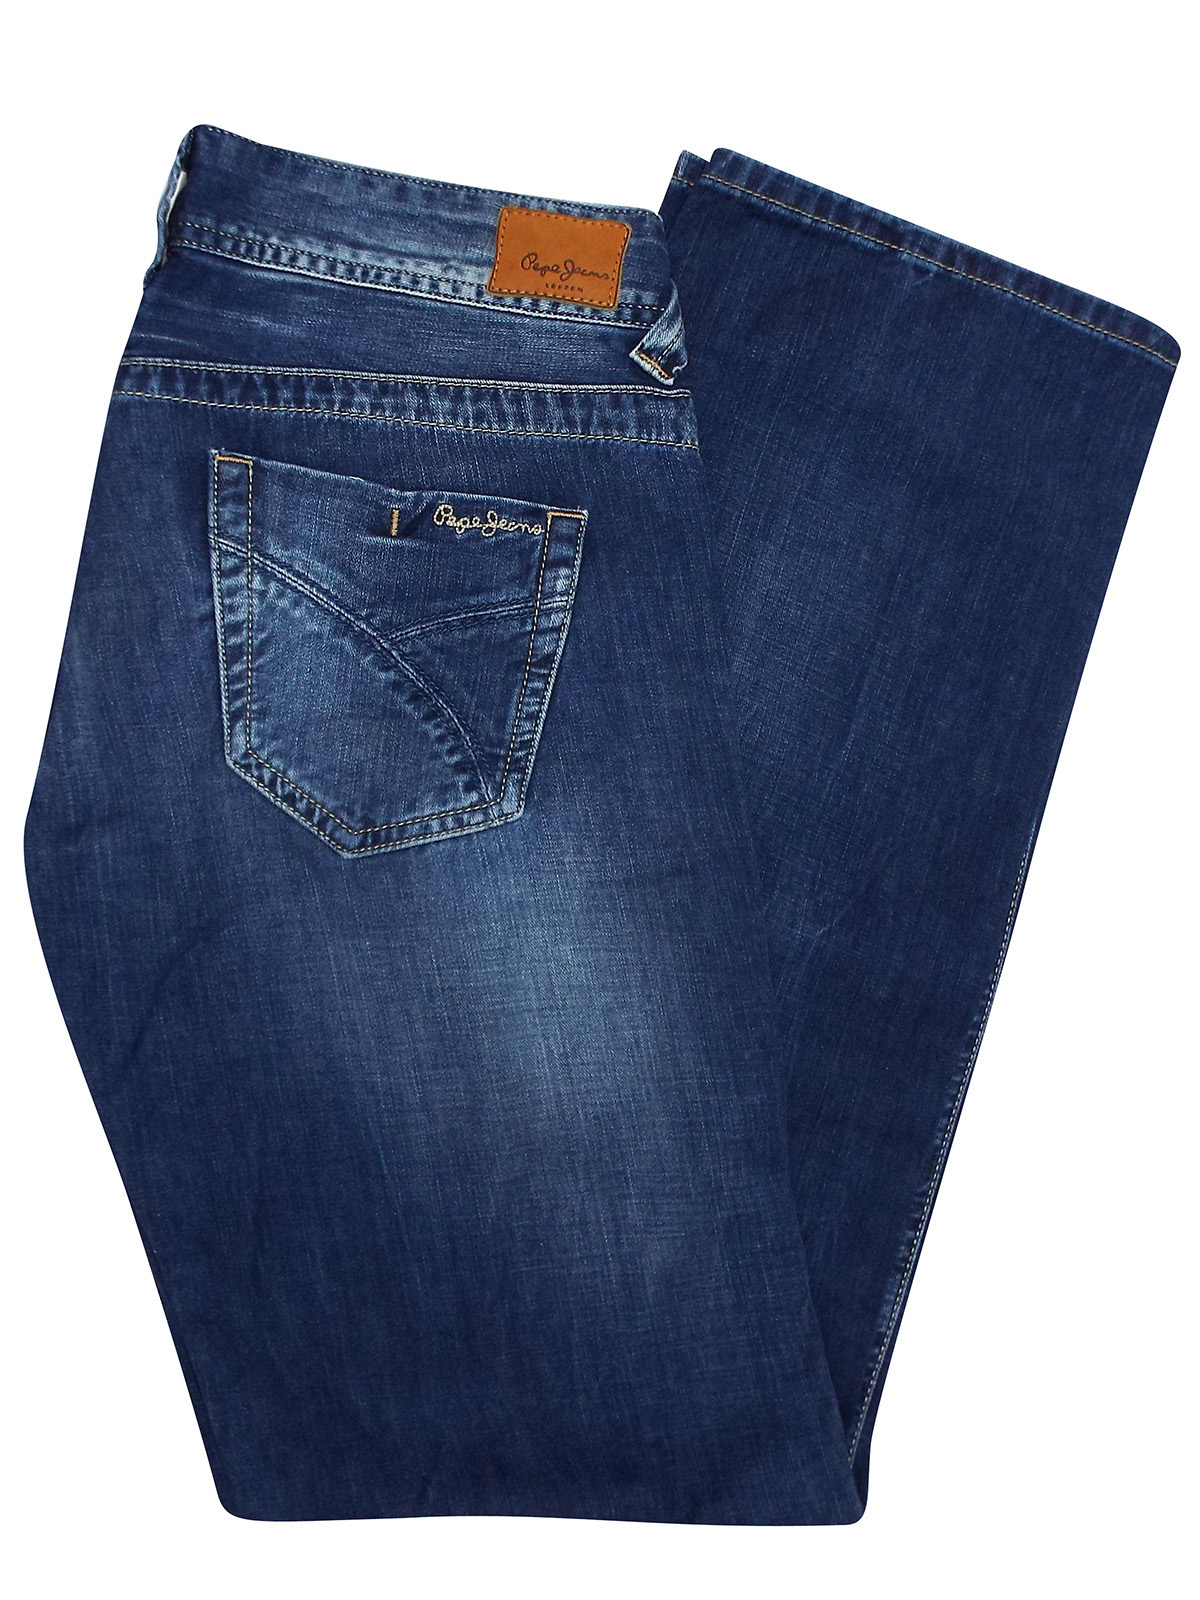 Pepe Jeans - - Pepe Jeans OLYMPIA DarkDENIM Comfort Fit Jeans - Waist ...